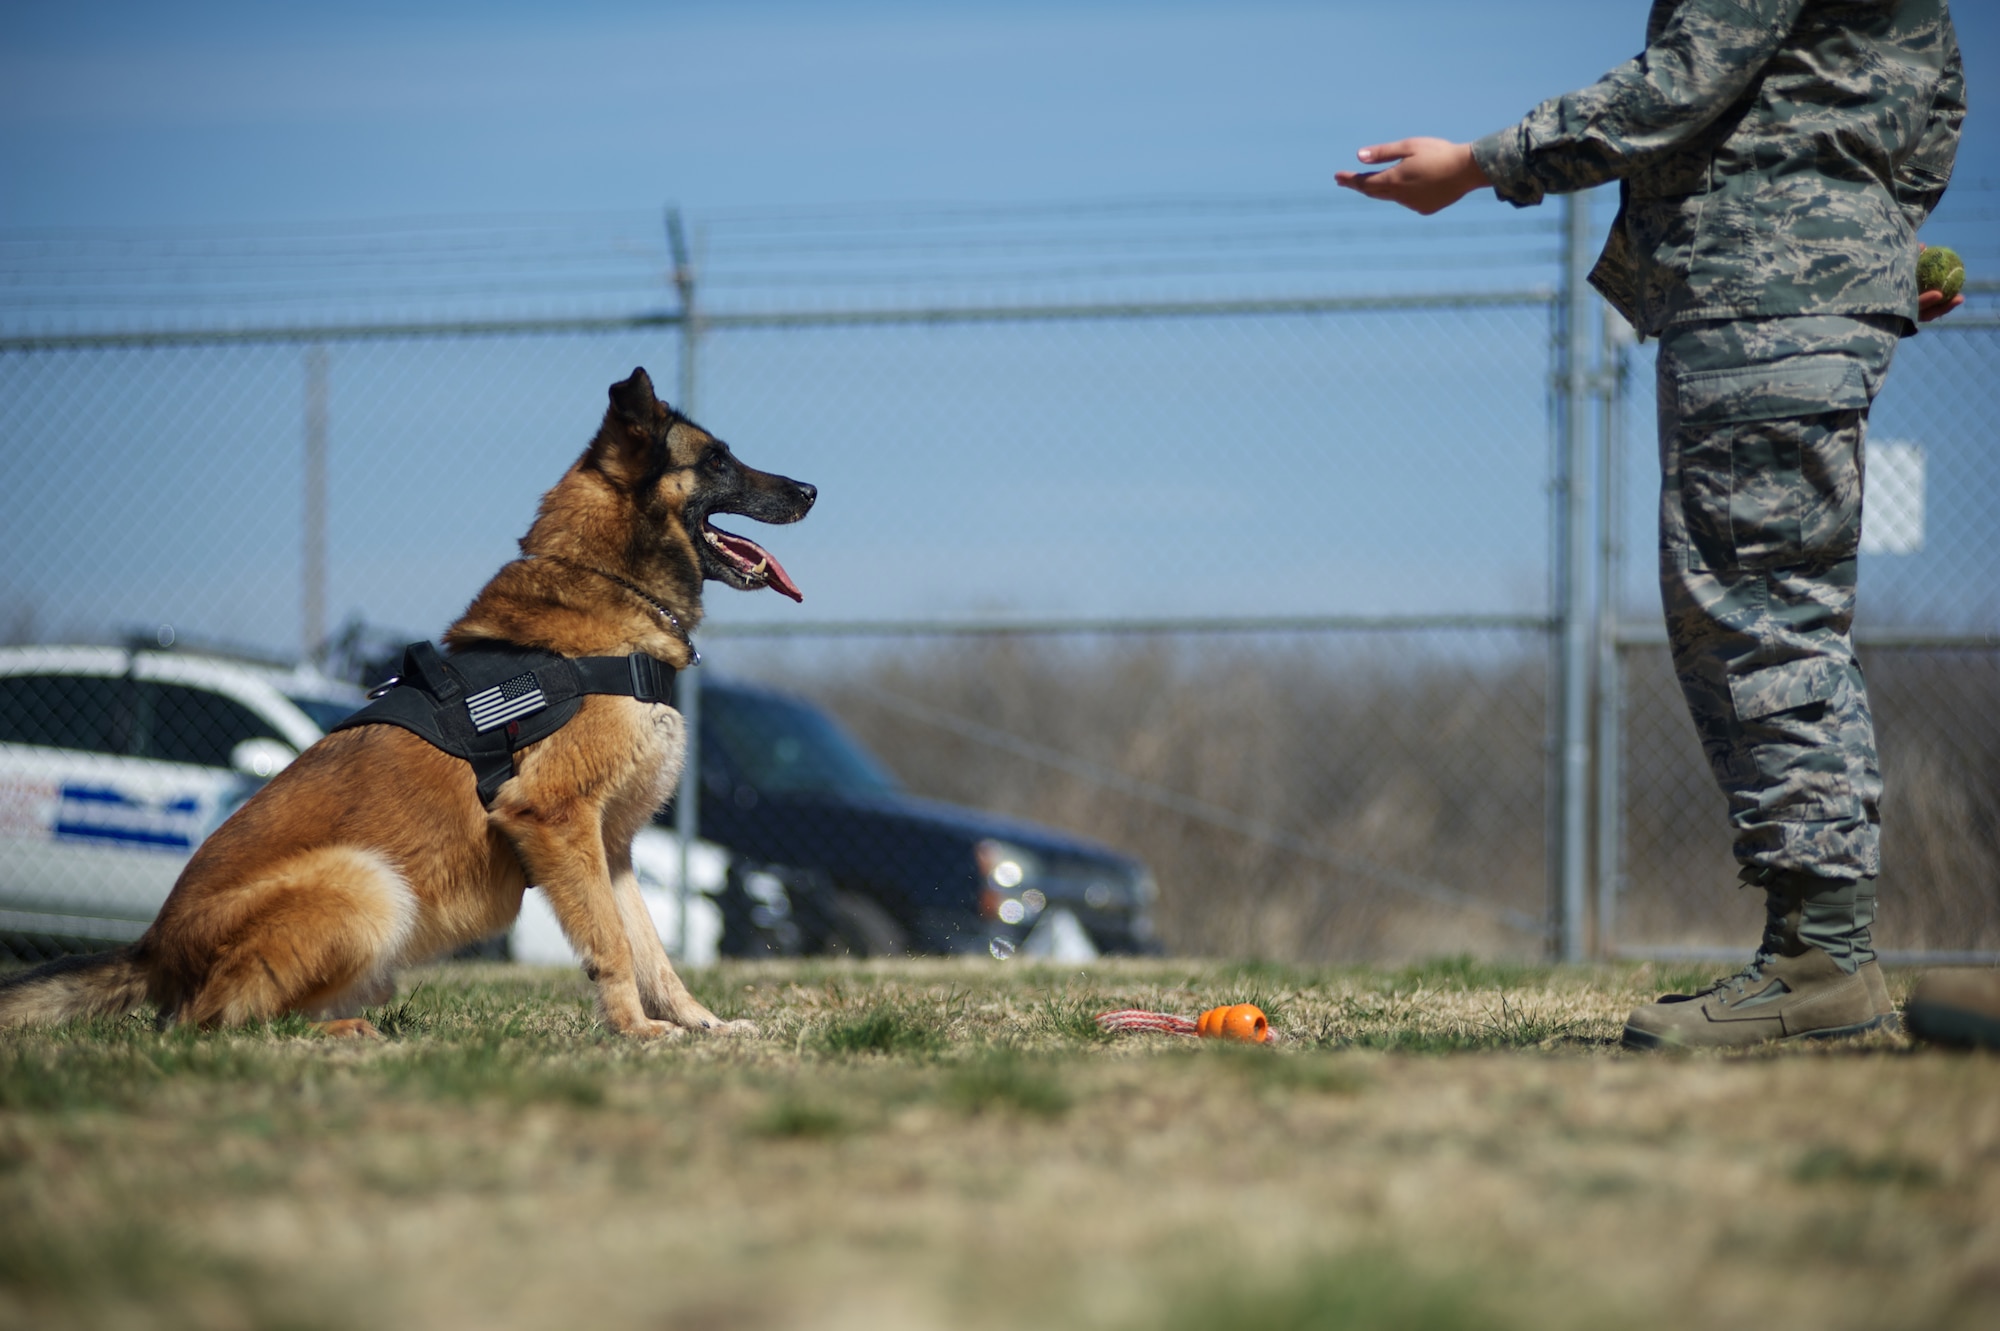 U.S. Air Force 2nd. Lt. Karrissa Garza, 7th Logistics Readiness Squadron, gives a command to military working dog (MWD) Condor March 26, 2013, at the 7th Security Forces Squadron MWD Compound on Dyess Air Force Base Texas. Garza is in the process of adopting Condor upon his retirement from the Air Force and pays frequent visits in order to form a bond with the dog. Condor, an 8 year old belgian malinois, is a veteran of Operation Iraqi Freedom as well as supported the U.S. Secret Service. (U.S. Air Force Photo by Tech. Sgt. Joshua T. Jasper/Released)
